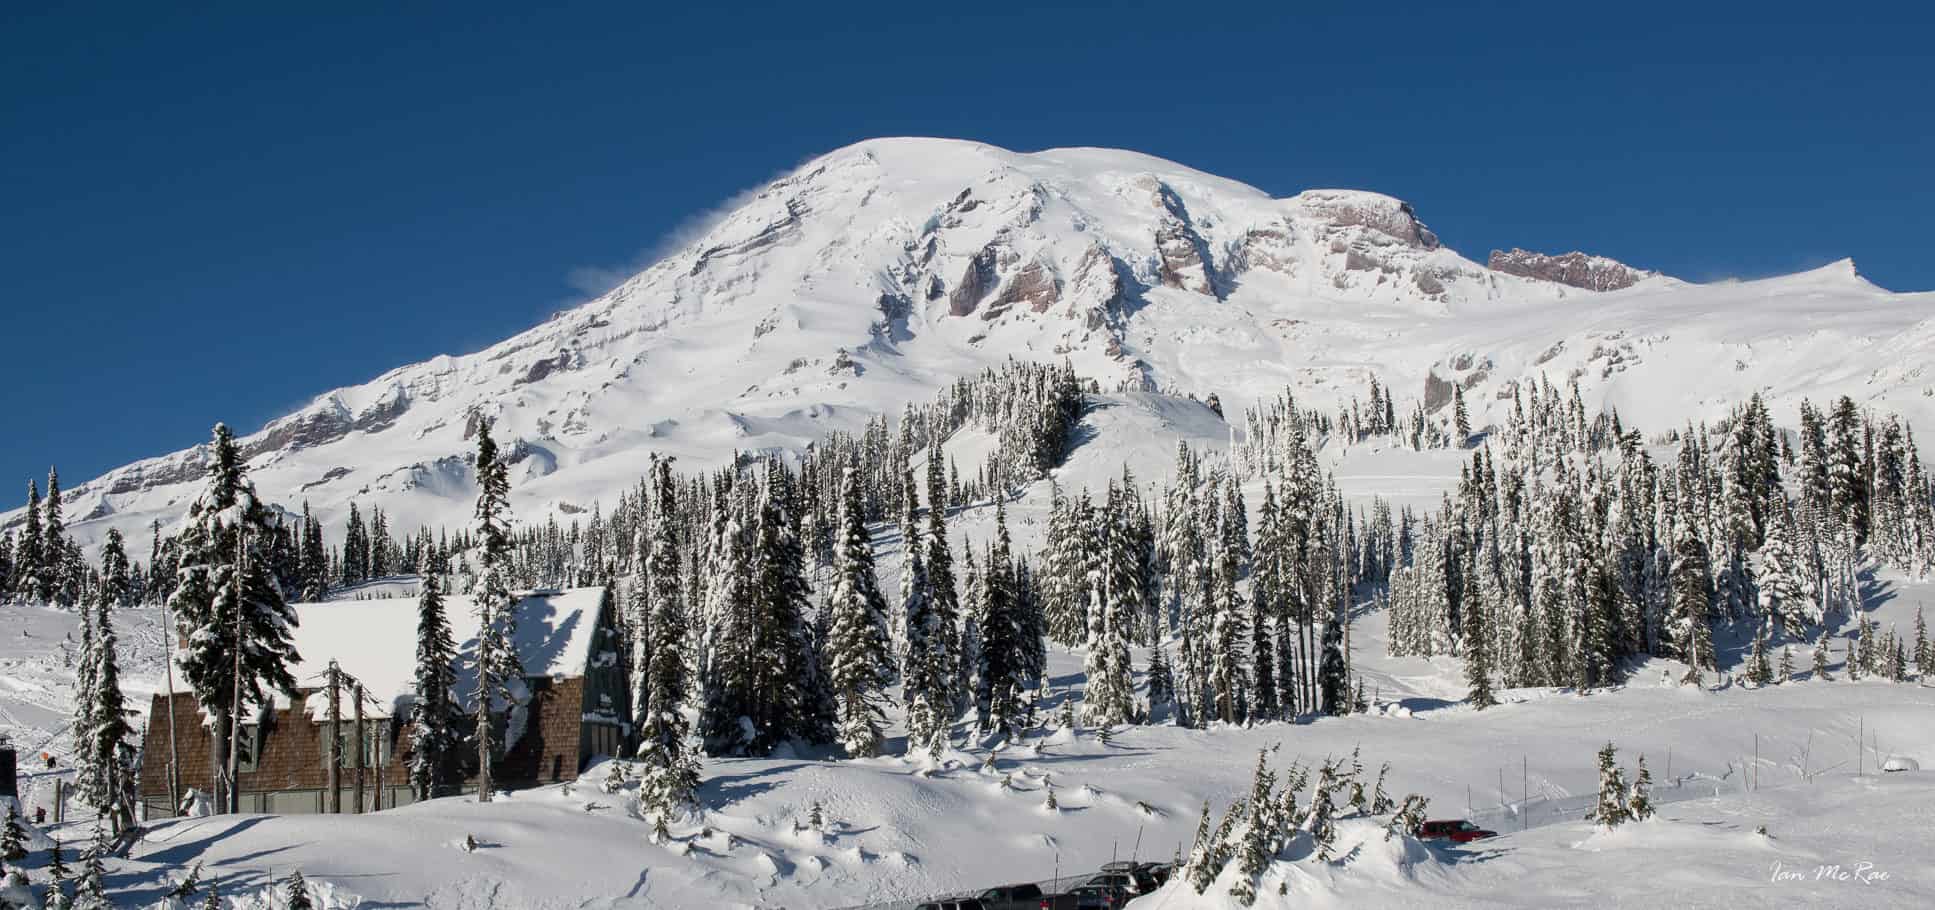 Winter Visits to Rainier | What to Know Before You Go